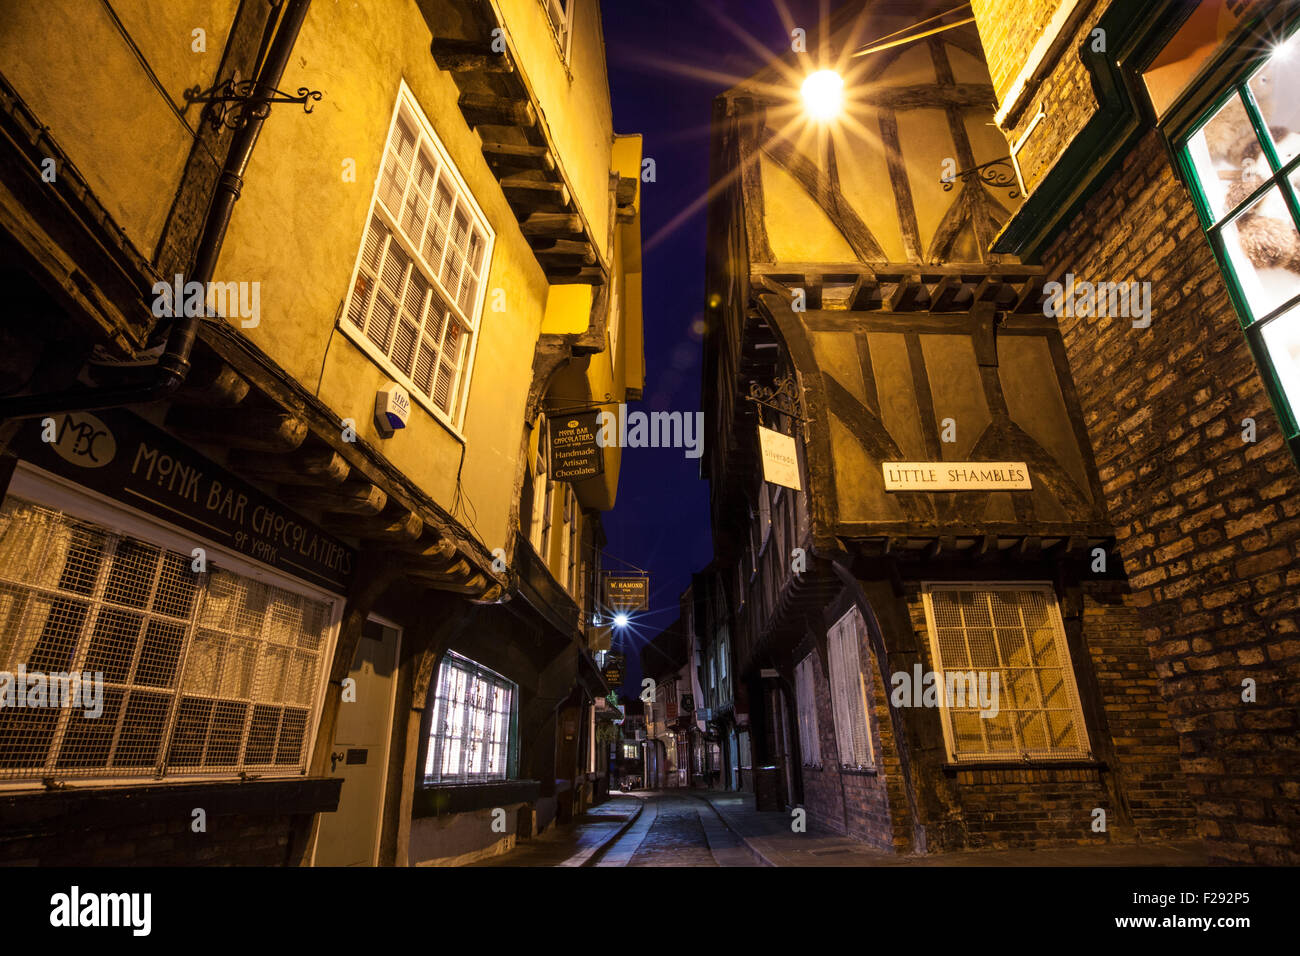 YORK, UK - AUGUST 29TH 2015: A view of the Shambles in York, on 29th August 2015.  It is one of the oldest streets in York with Stock Photo